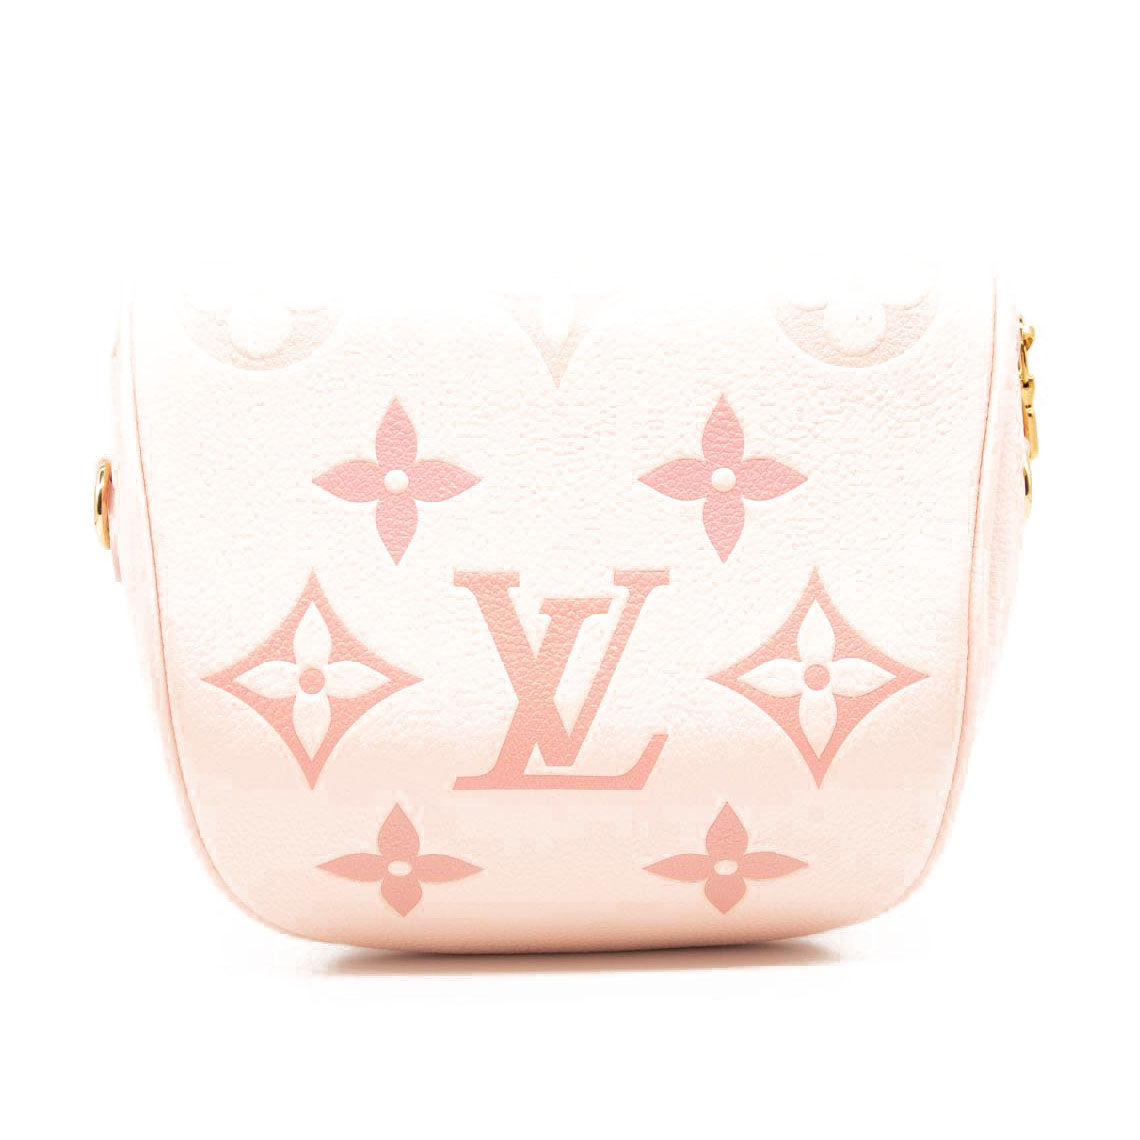 louis vuitton white and pink